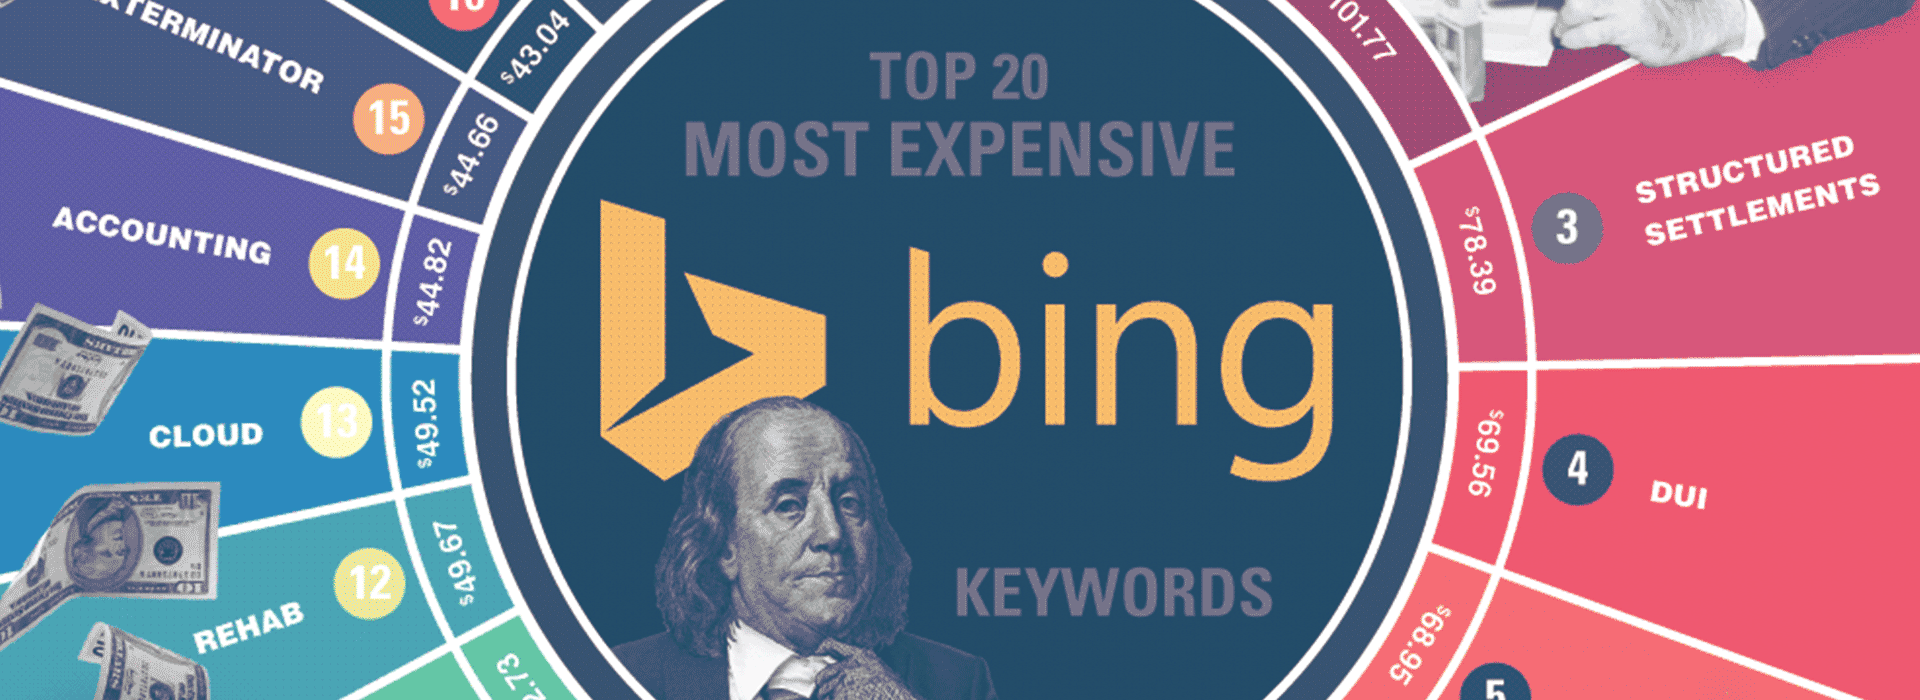 Top 20 Most Expensive Bing Keywords [Infographic]